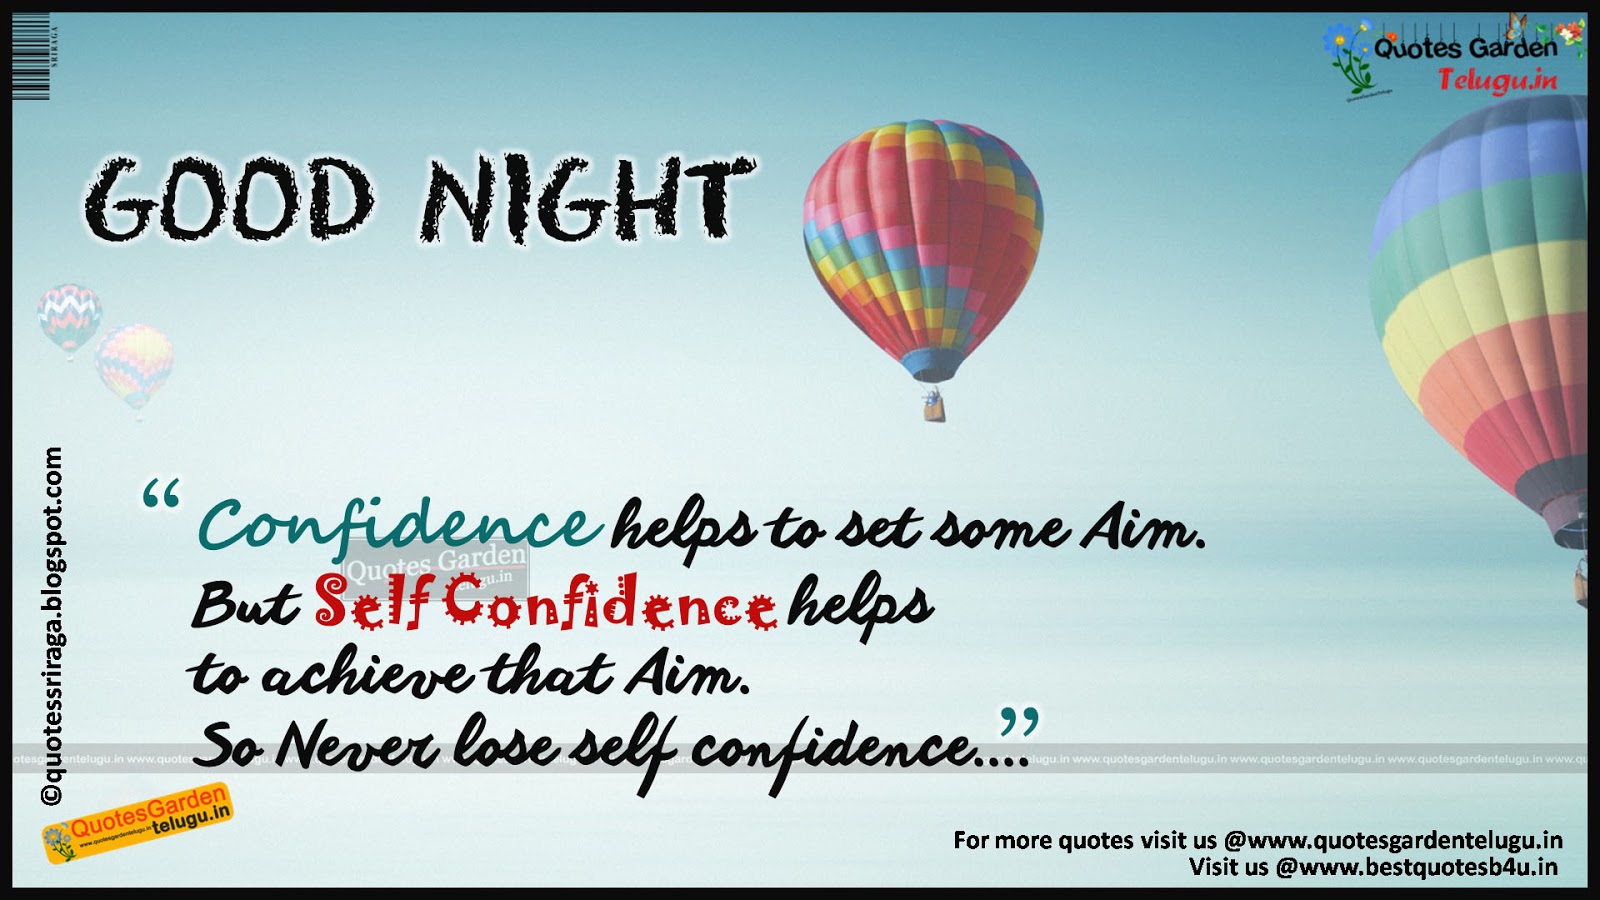 Self confidence quotes with good night greetings | QUOTES GARDEN ...